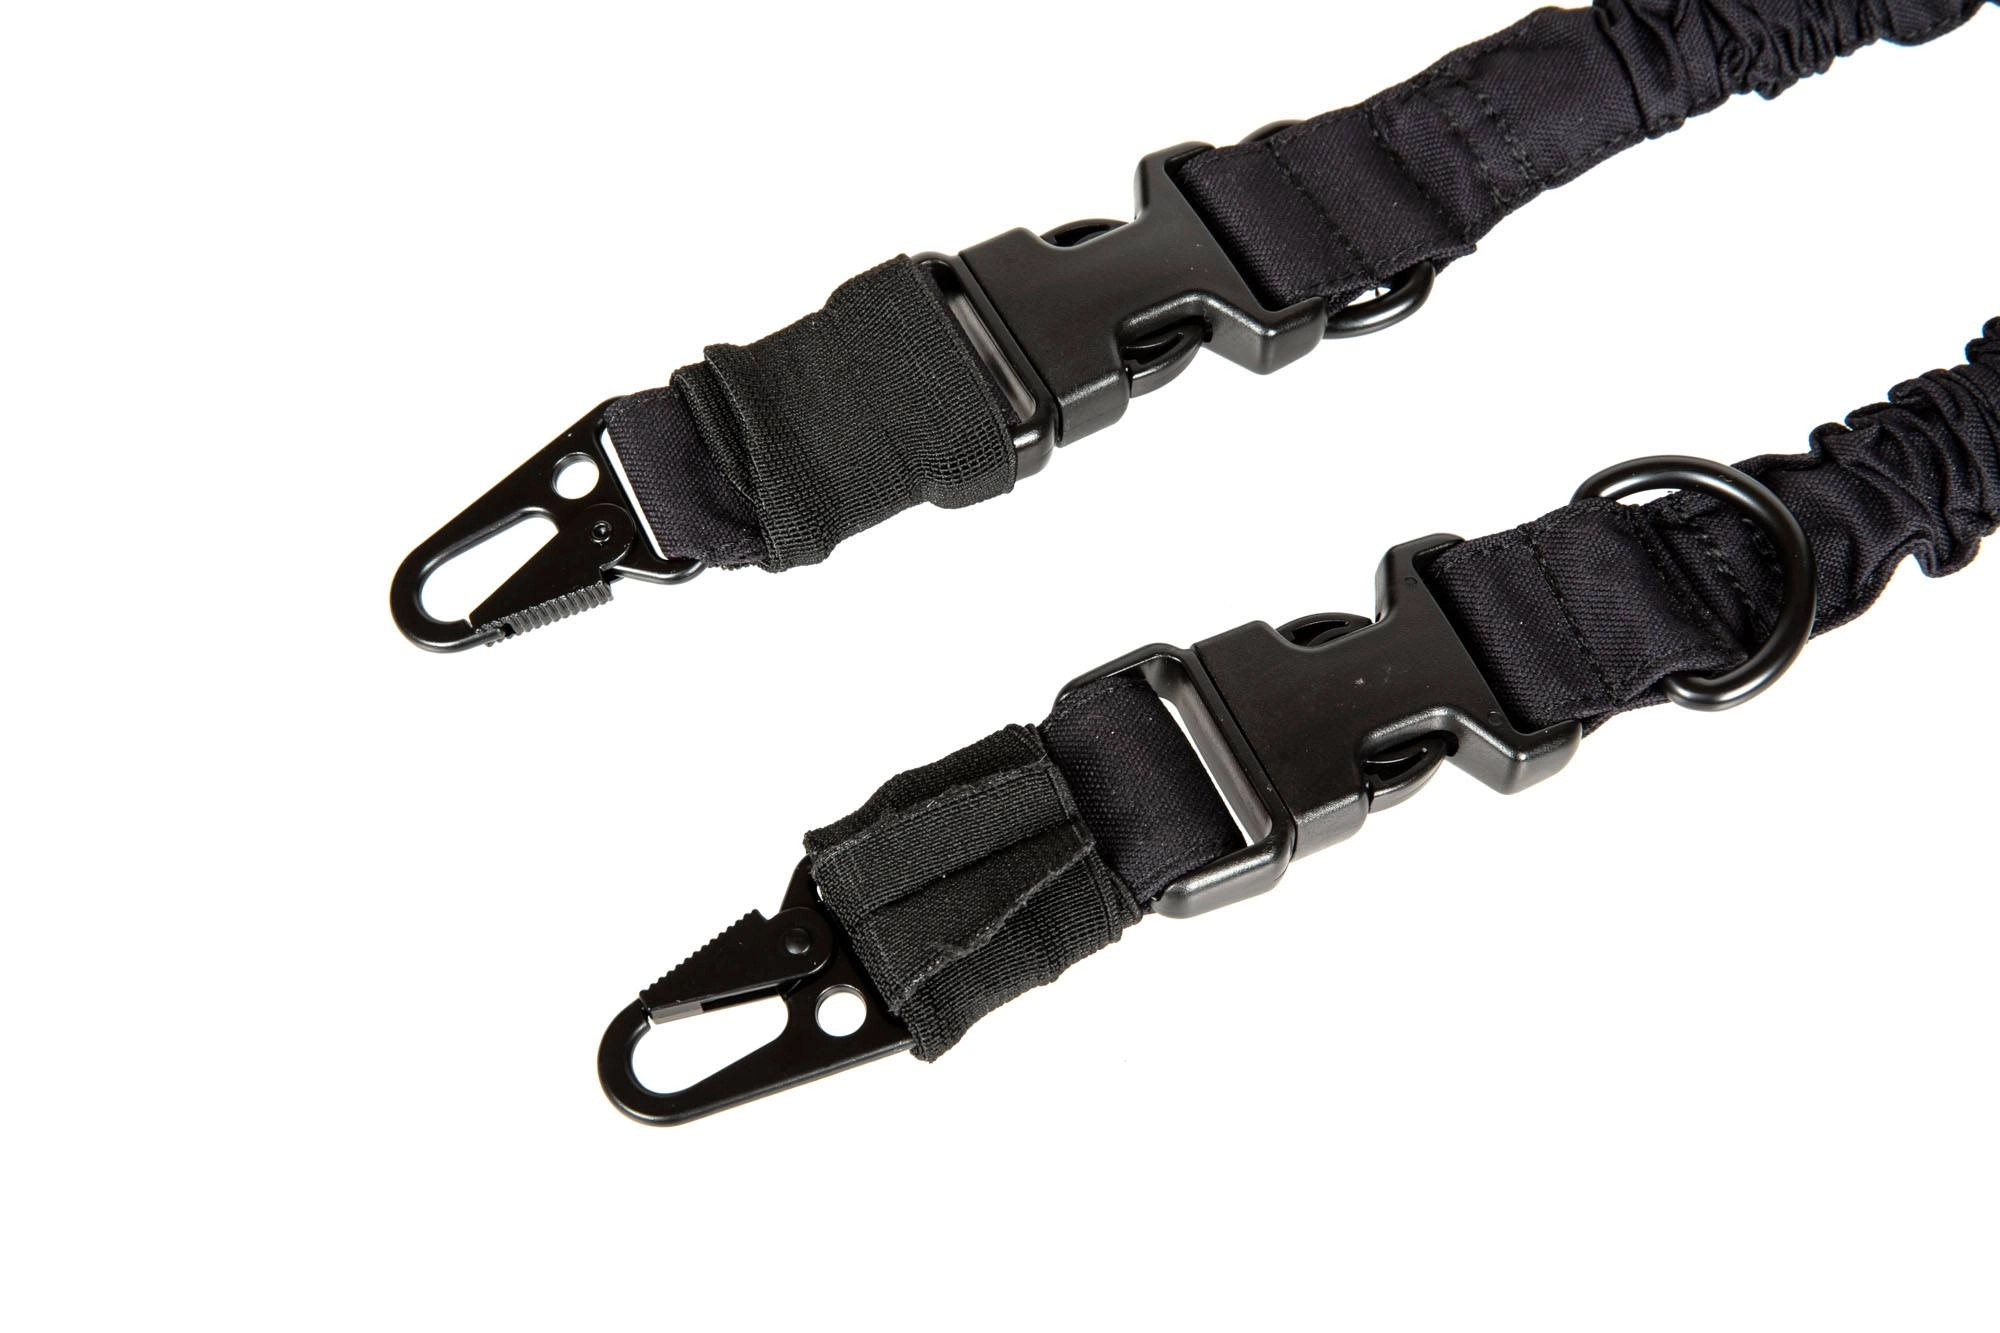 2-point bungee sling Acodon - Black